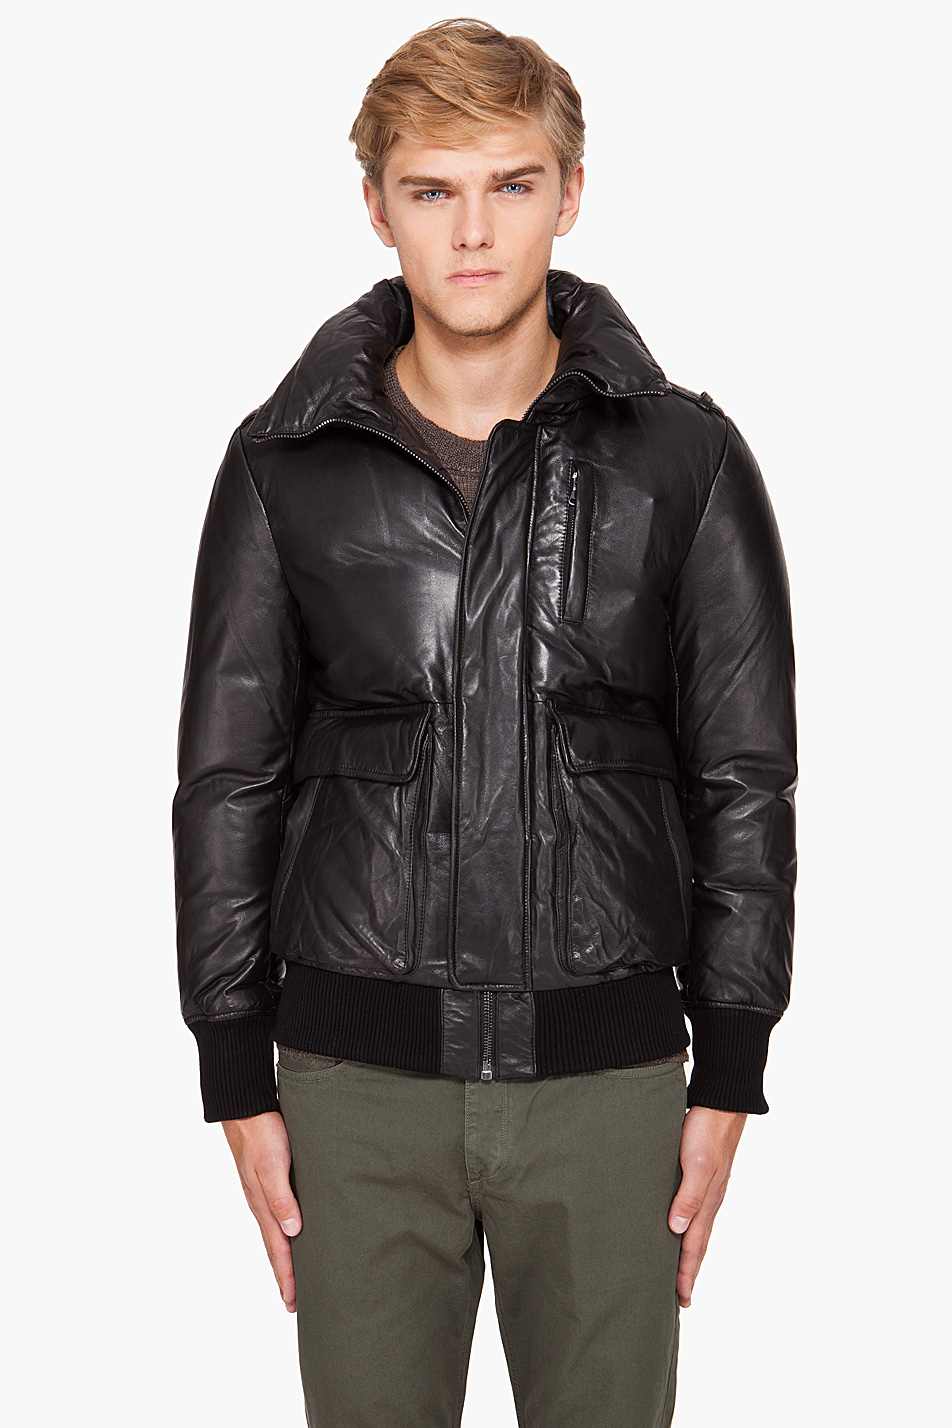 Lyst - Mackage Shaun Puffy Leather Coat in Black for Men